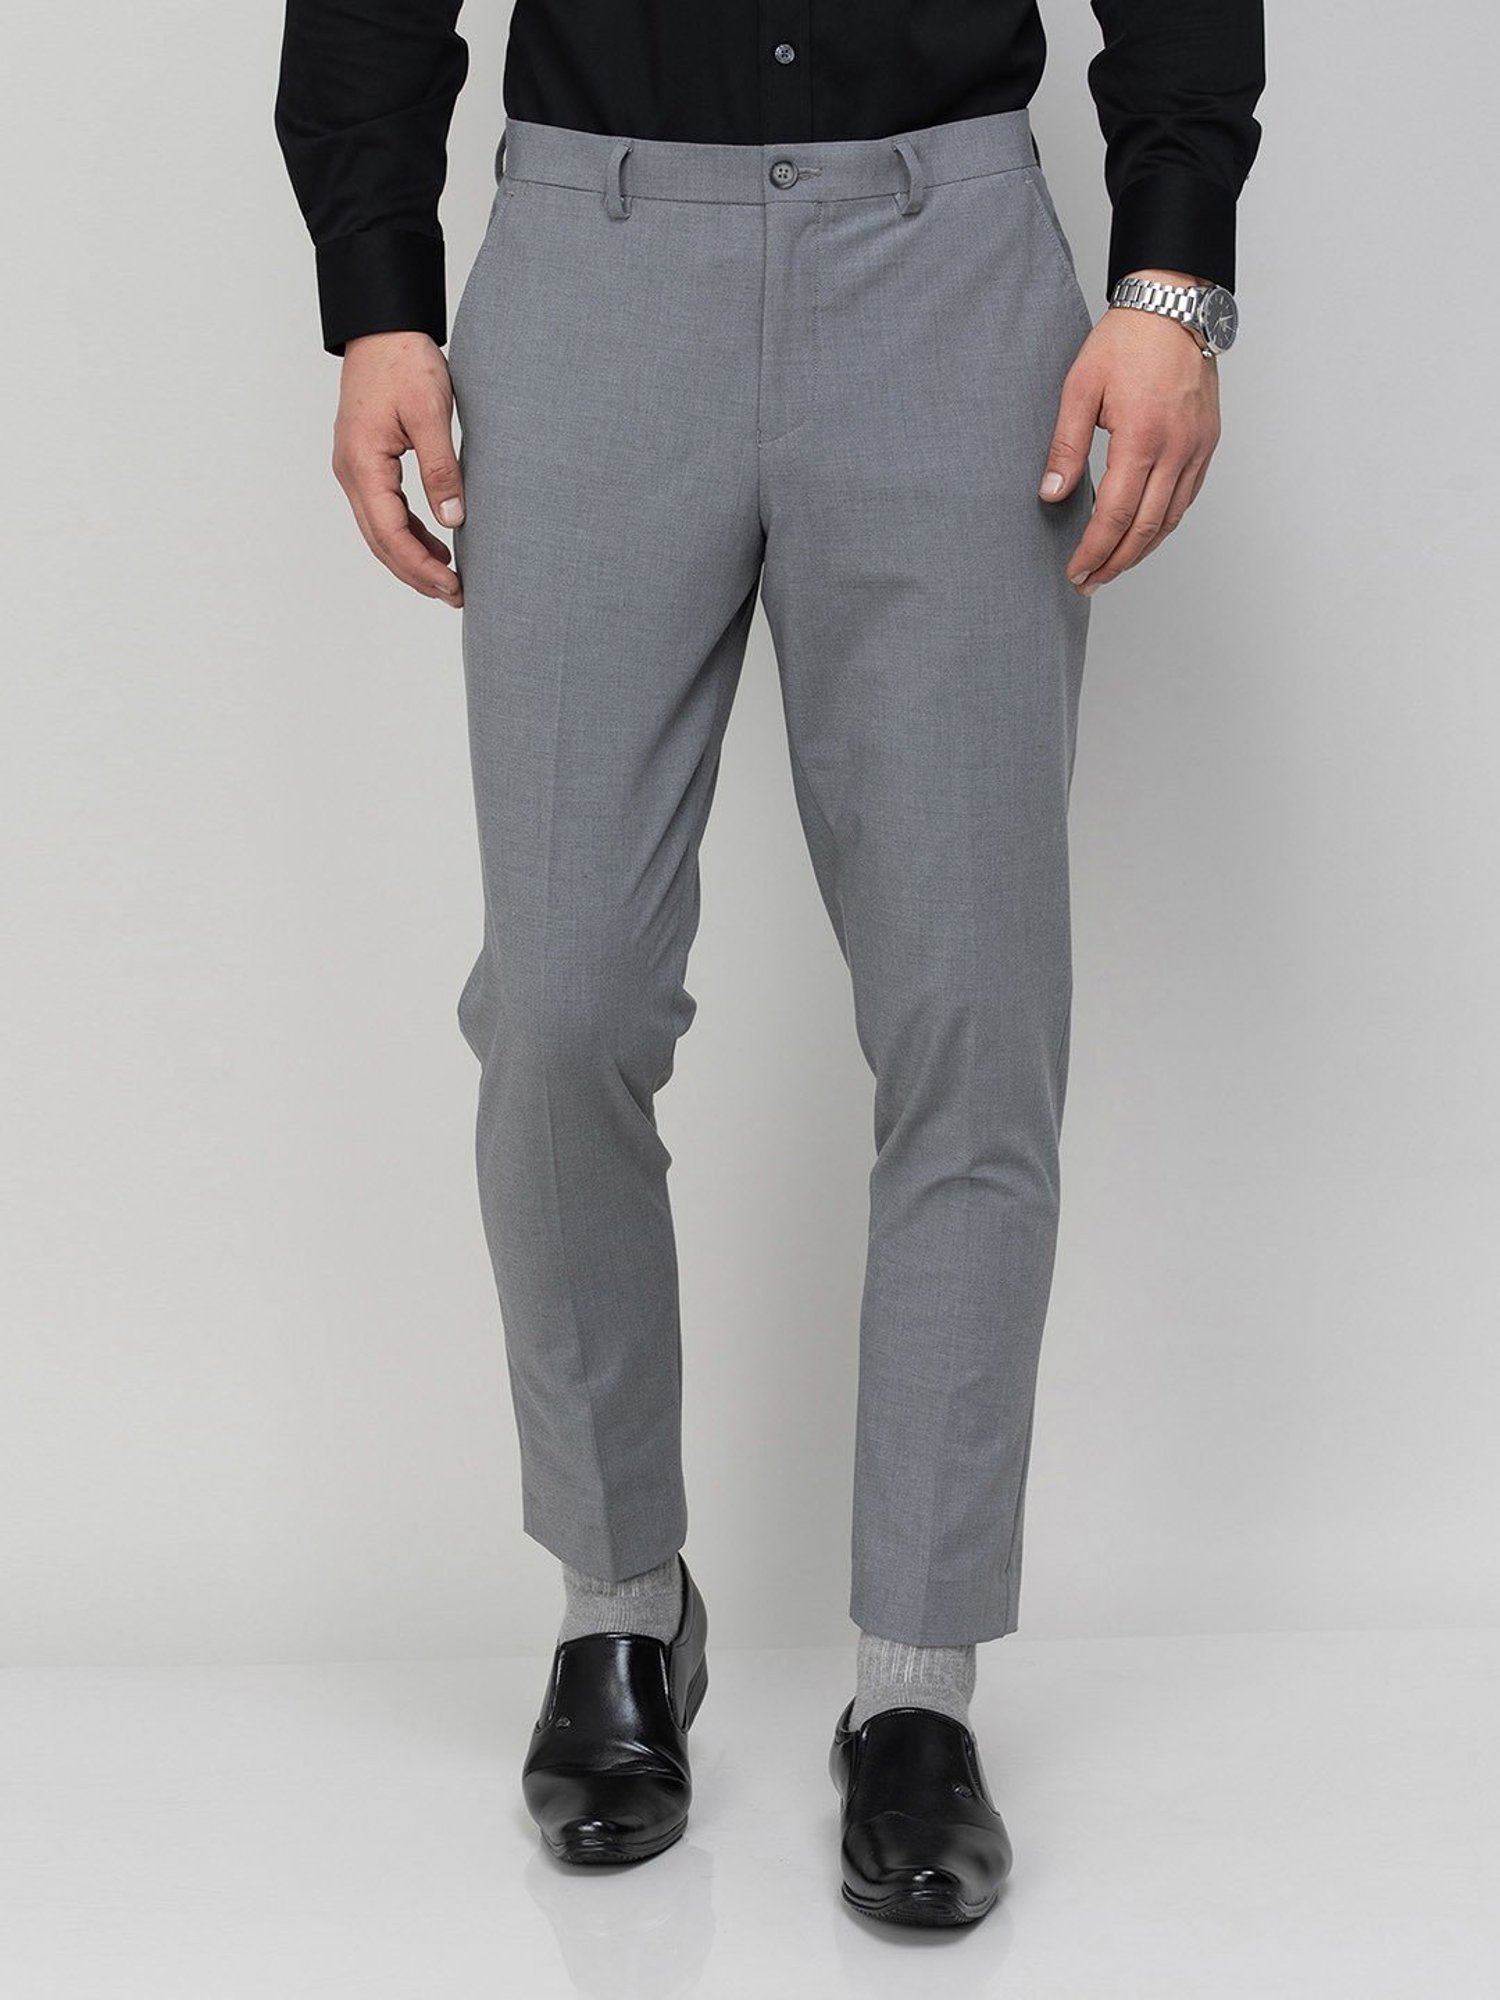 Buy Charcoal Grey Trousers  Pants for Men by CODE BY LIFESTYLE Online   Ajiocom